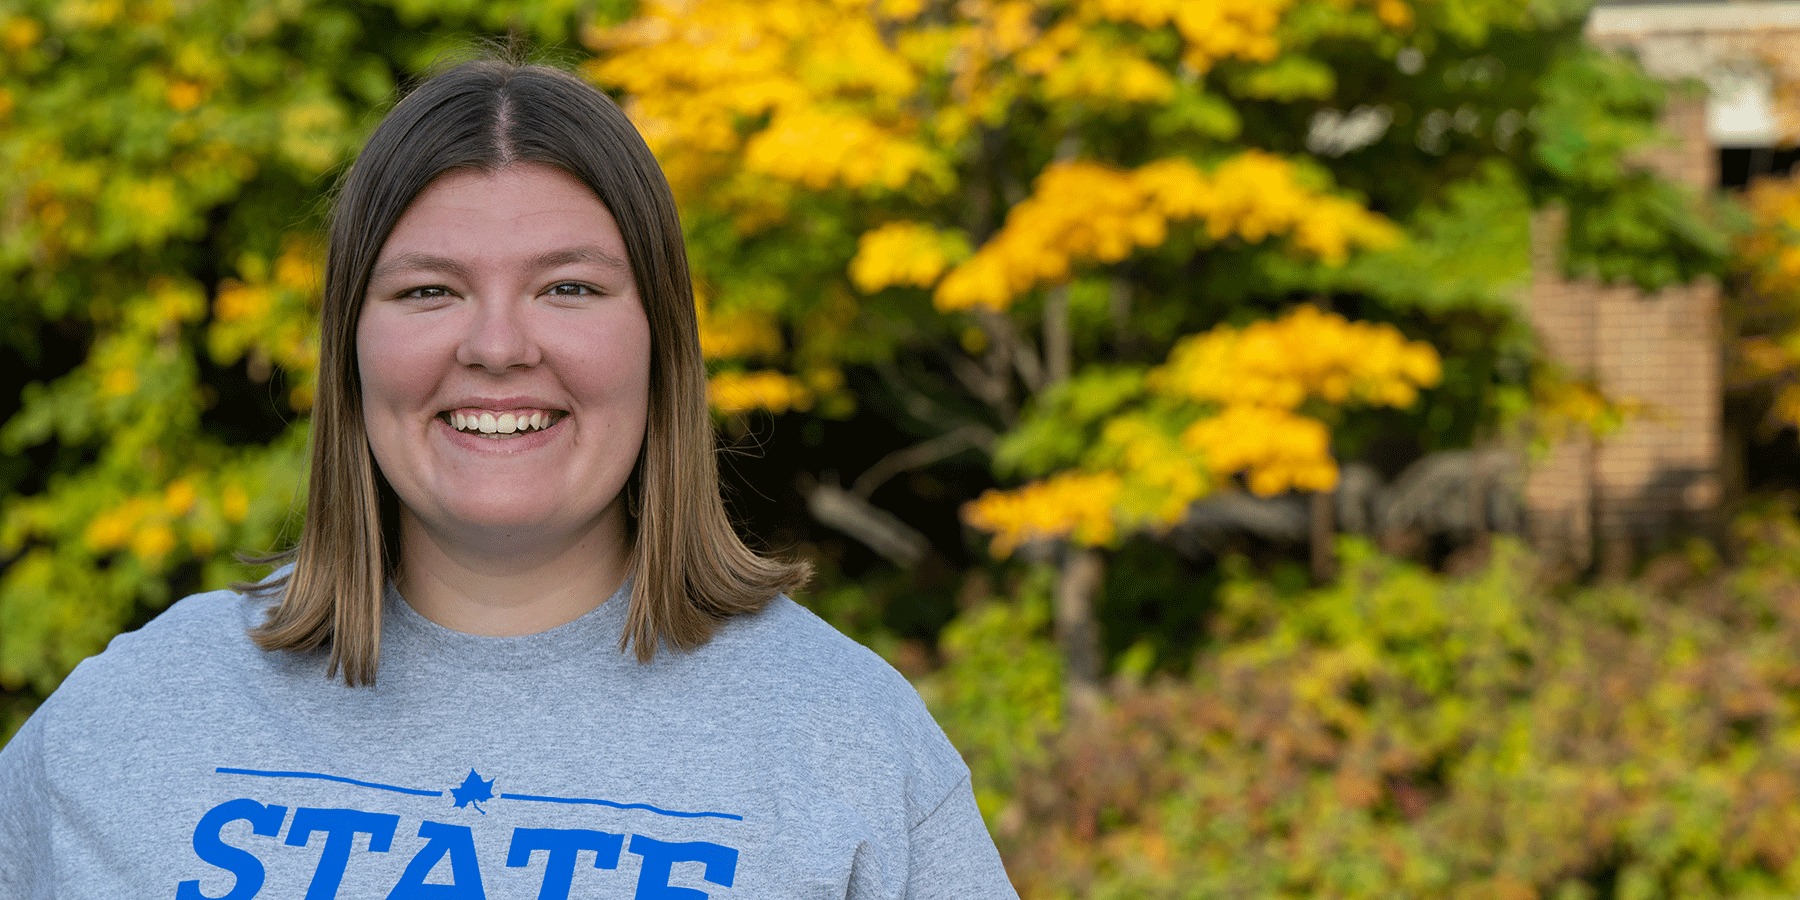 A white female student with shoulder-length brown hair poses outside, smiling. She wears a grey T-shirt with STATE in blue lettering on the front. Green trees with a variety of light yellow/orange leaves are blurred in the background.